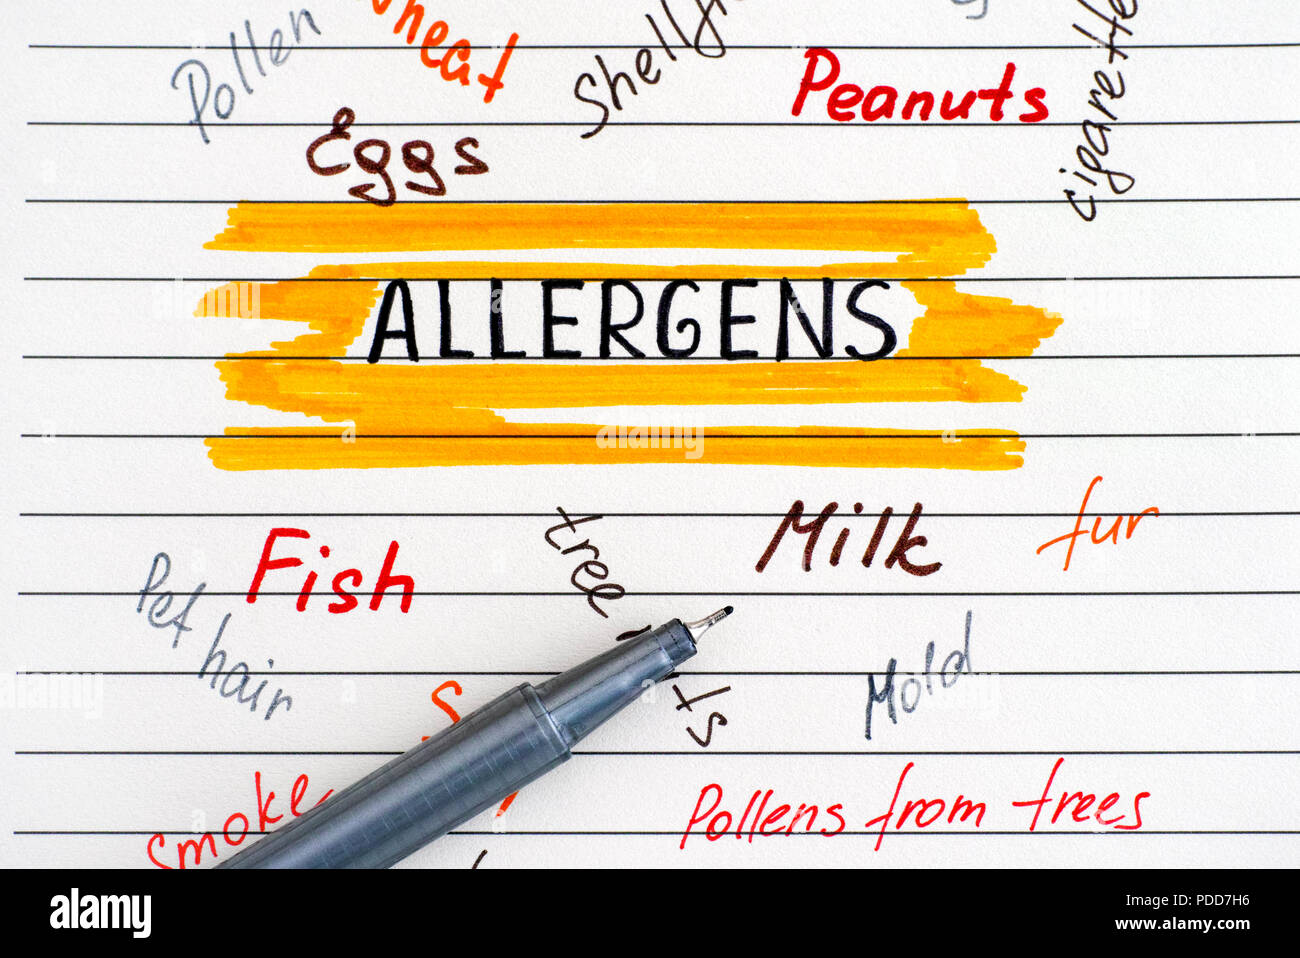 Different allergens written on lined paper and pen. Close-up. Stock Photo